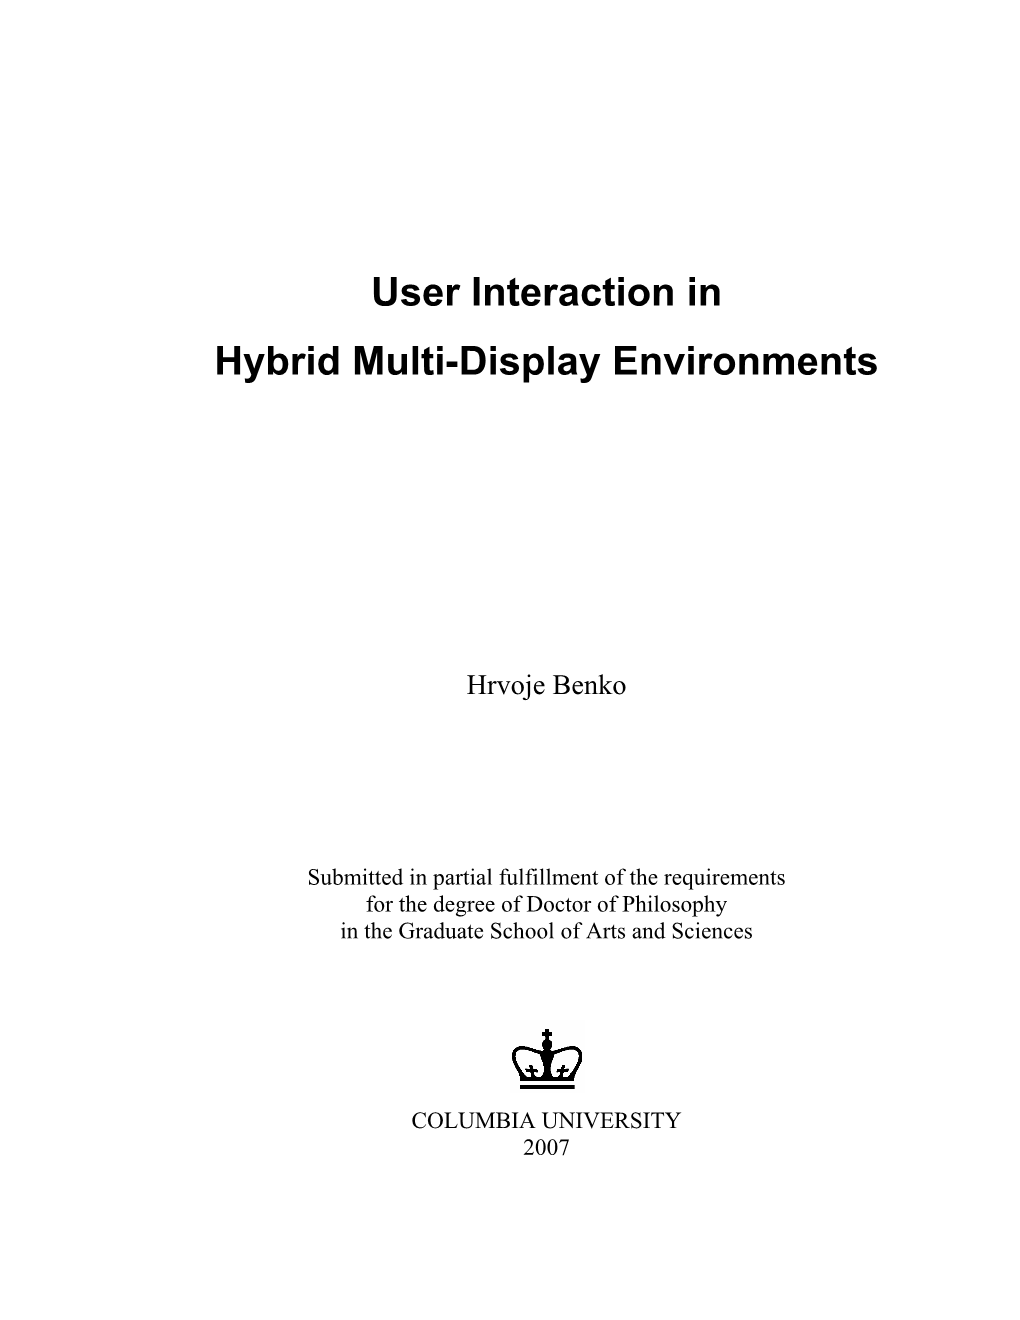 User Interaction in Hybrid Multi-Display Environments